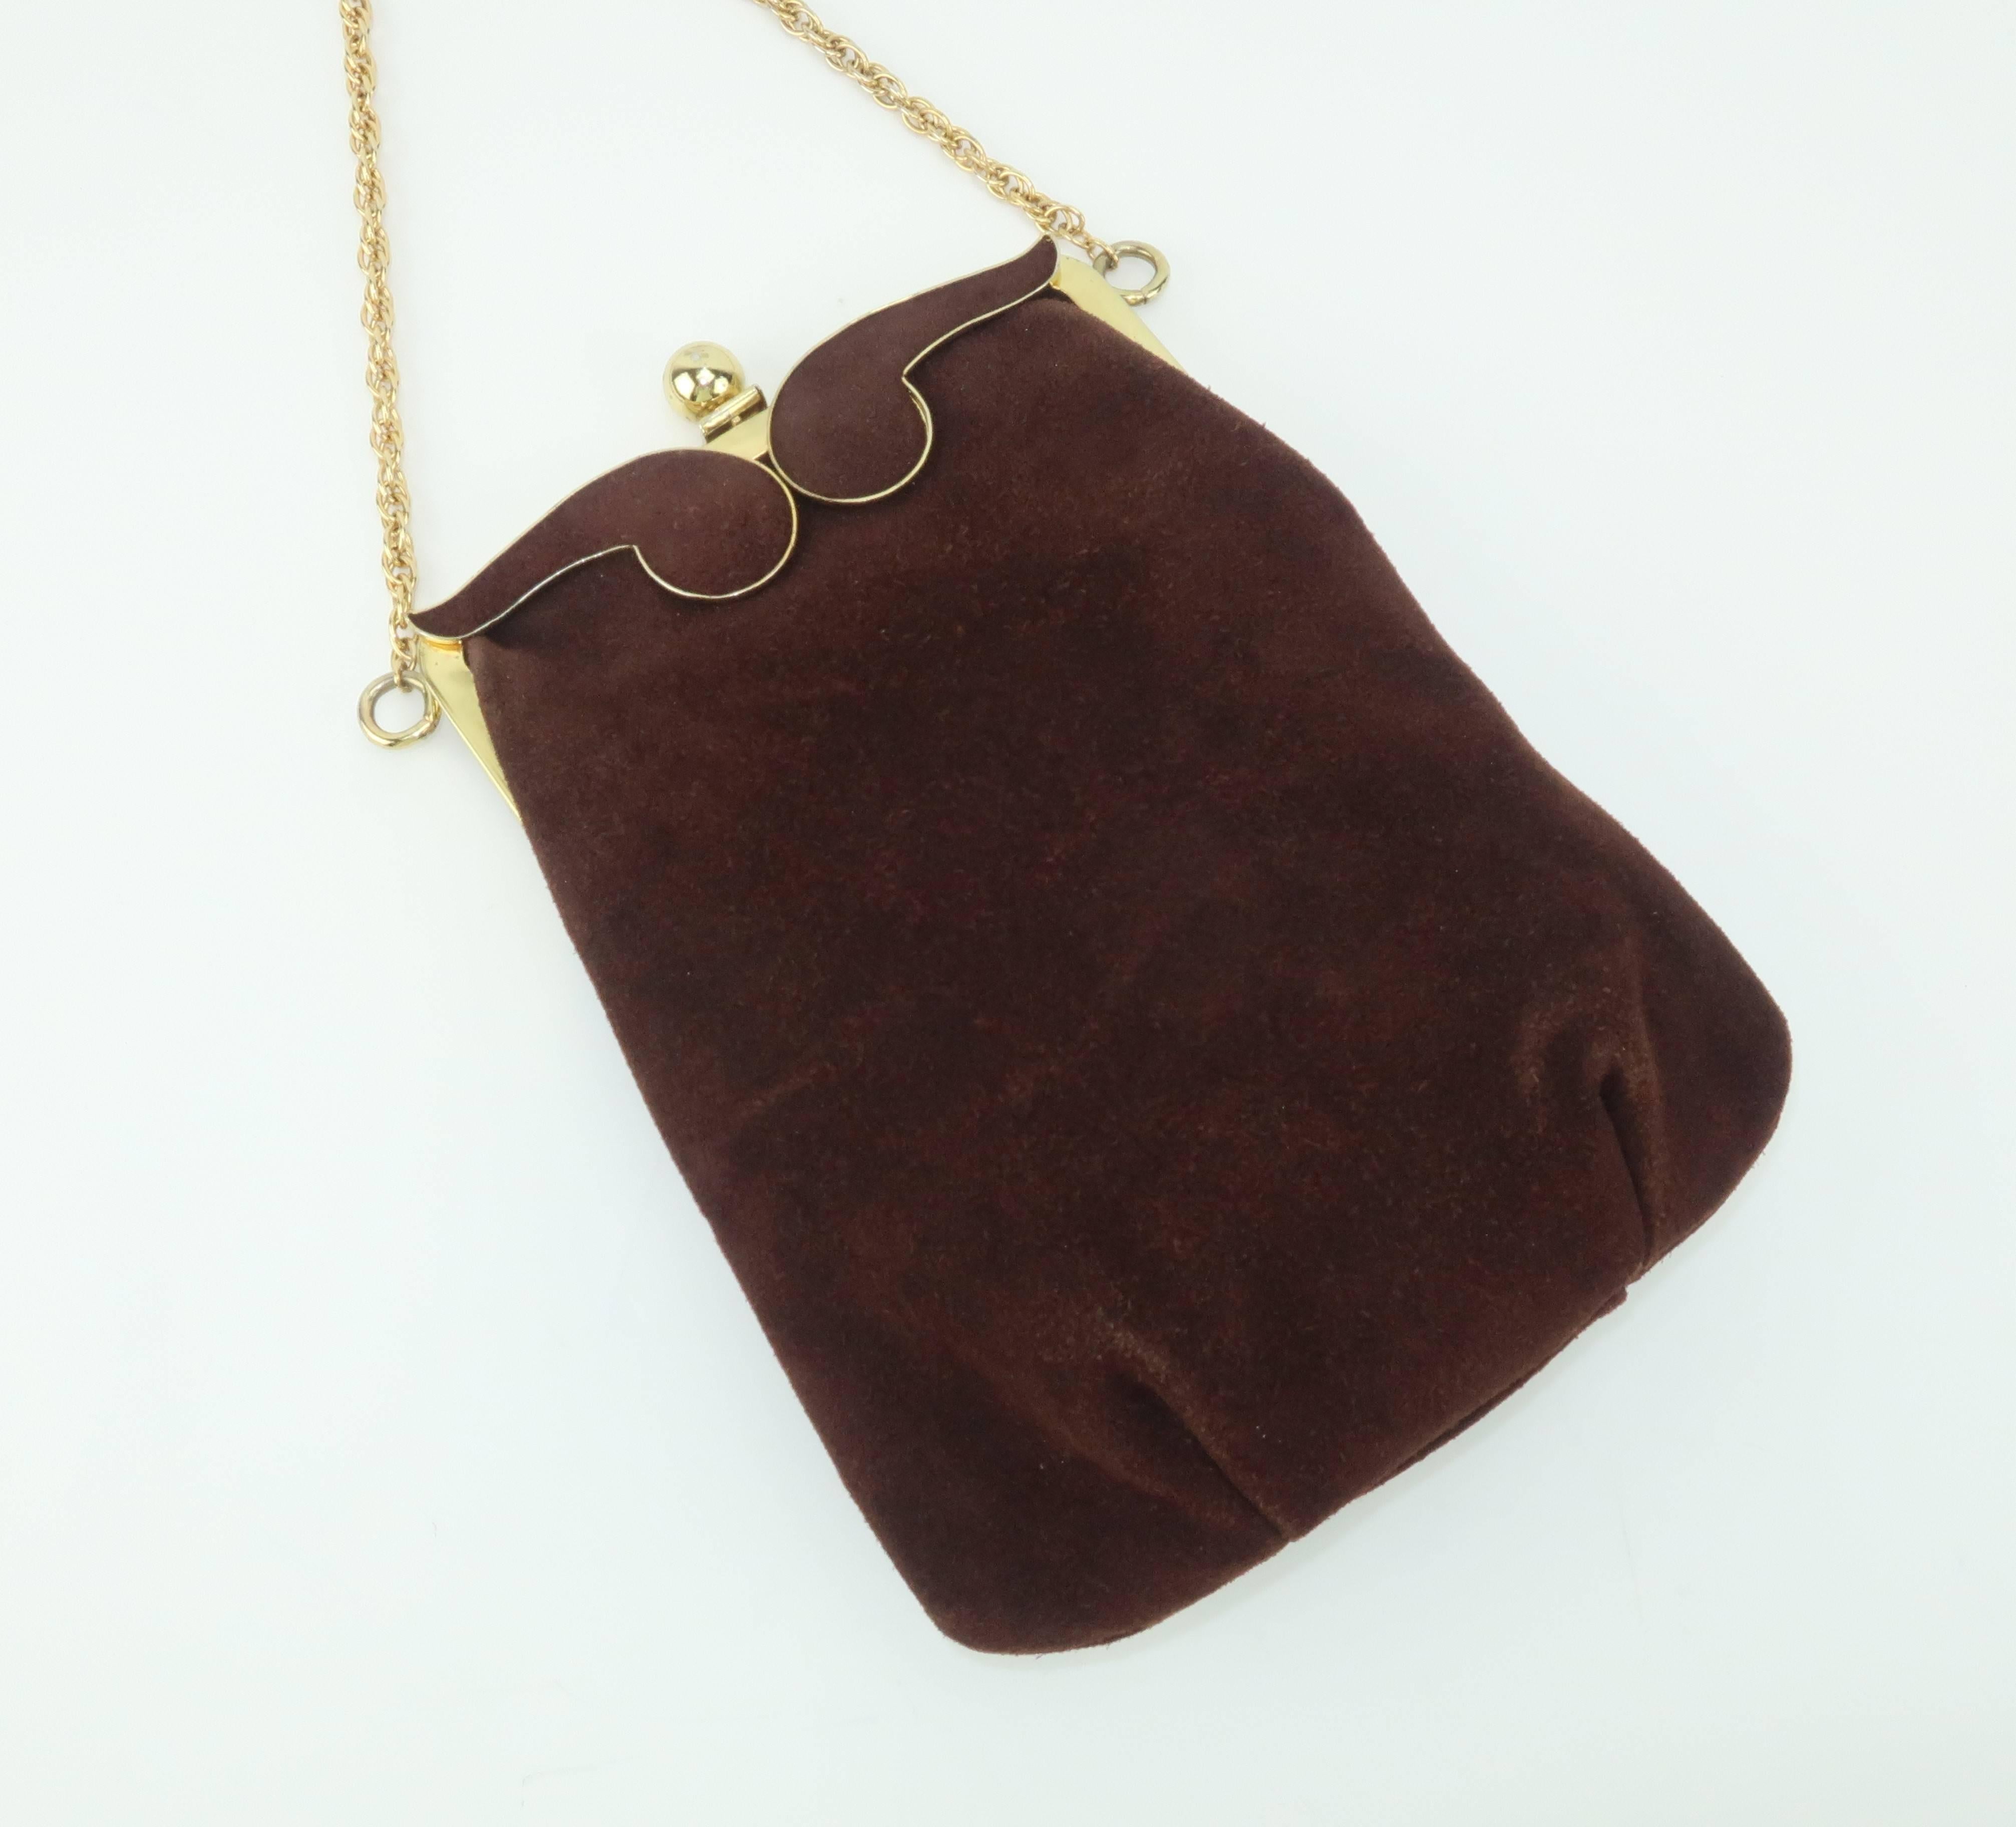 Women's 1960's Brown Suede Leather Handbag With Gold Chain Shoulder Handle